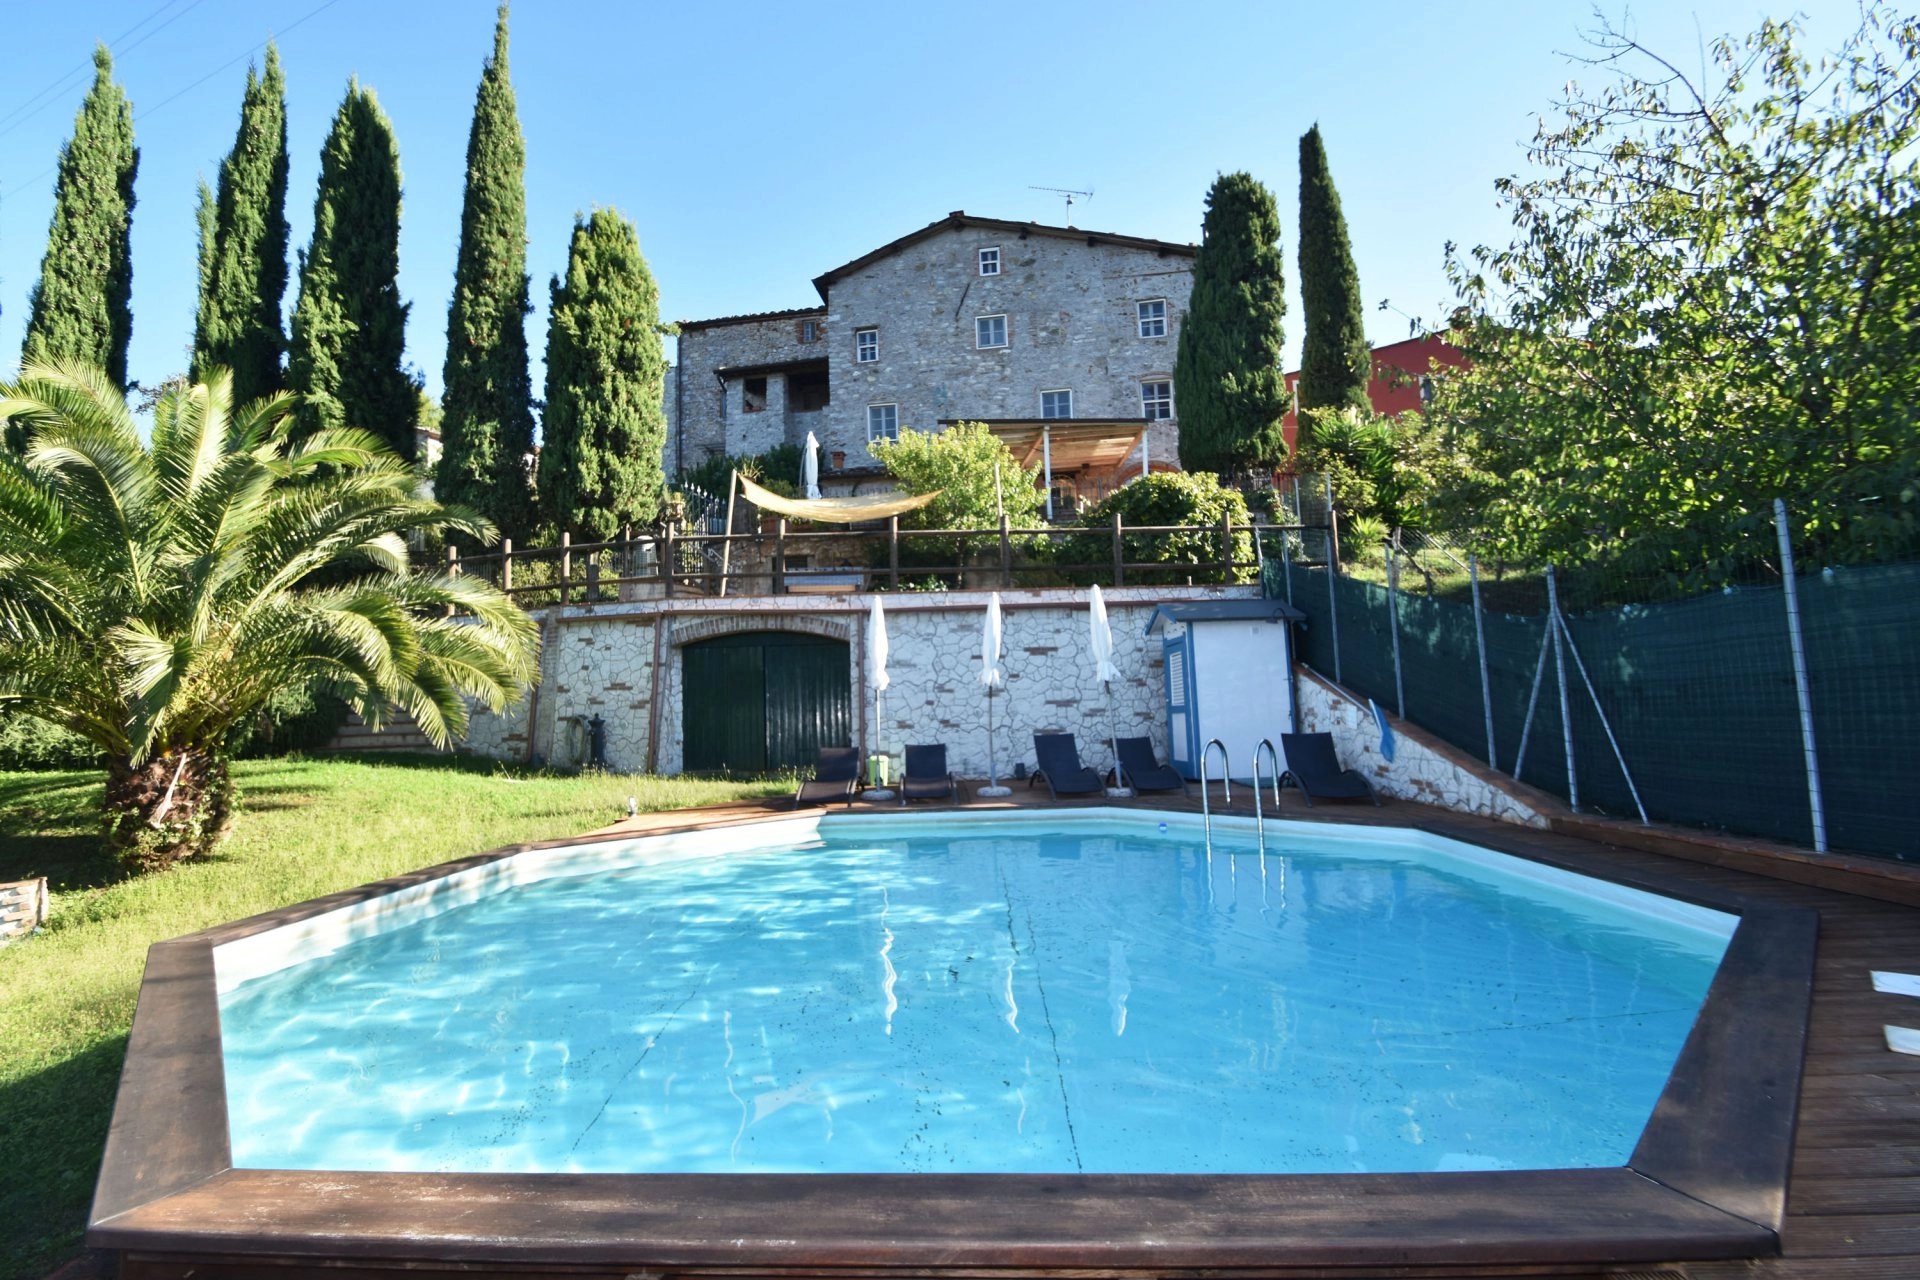 ITALY, TUSCANY, LUCCA, FARMHOUSE WITH POOL,  8 PERSONS